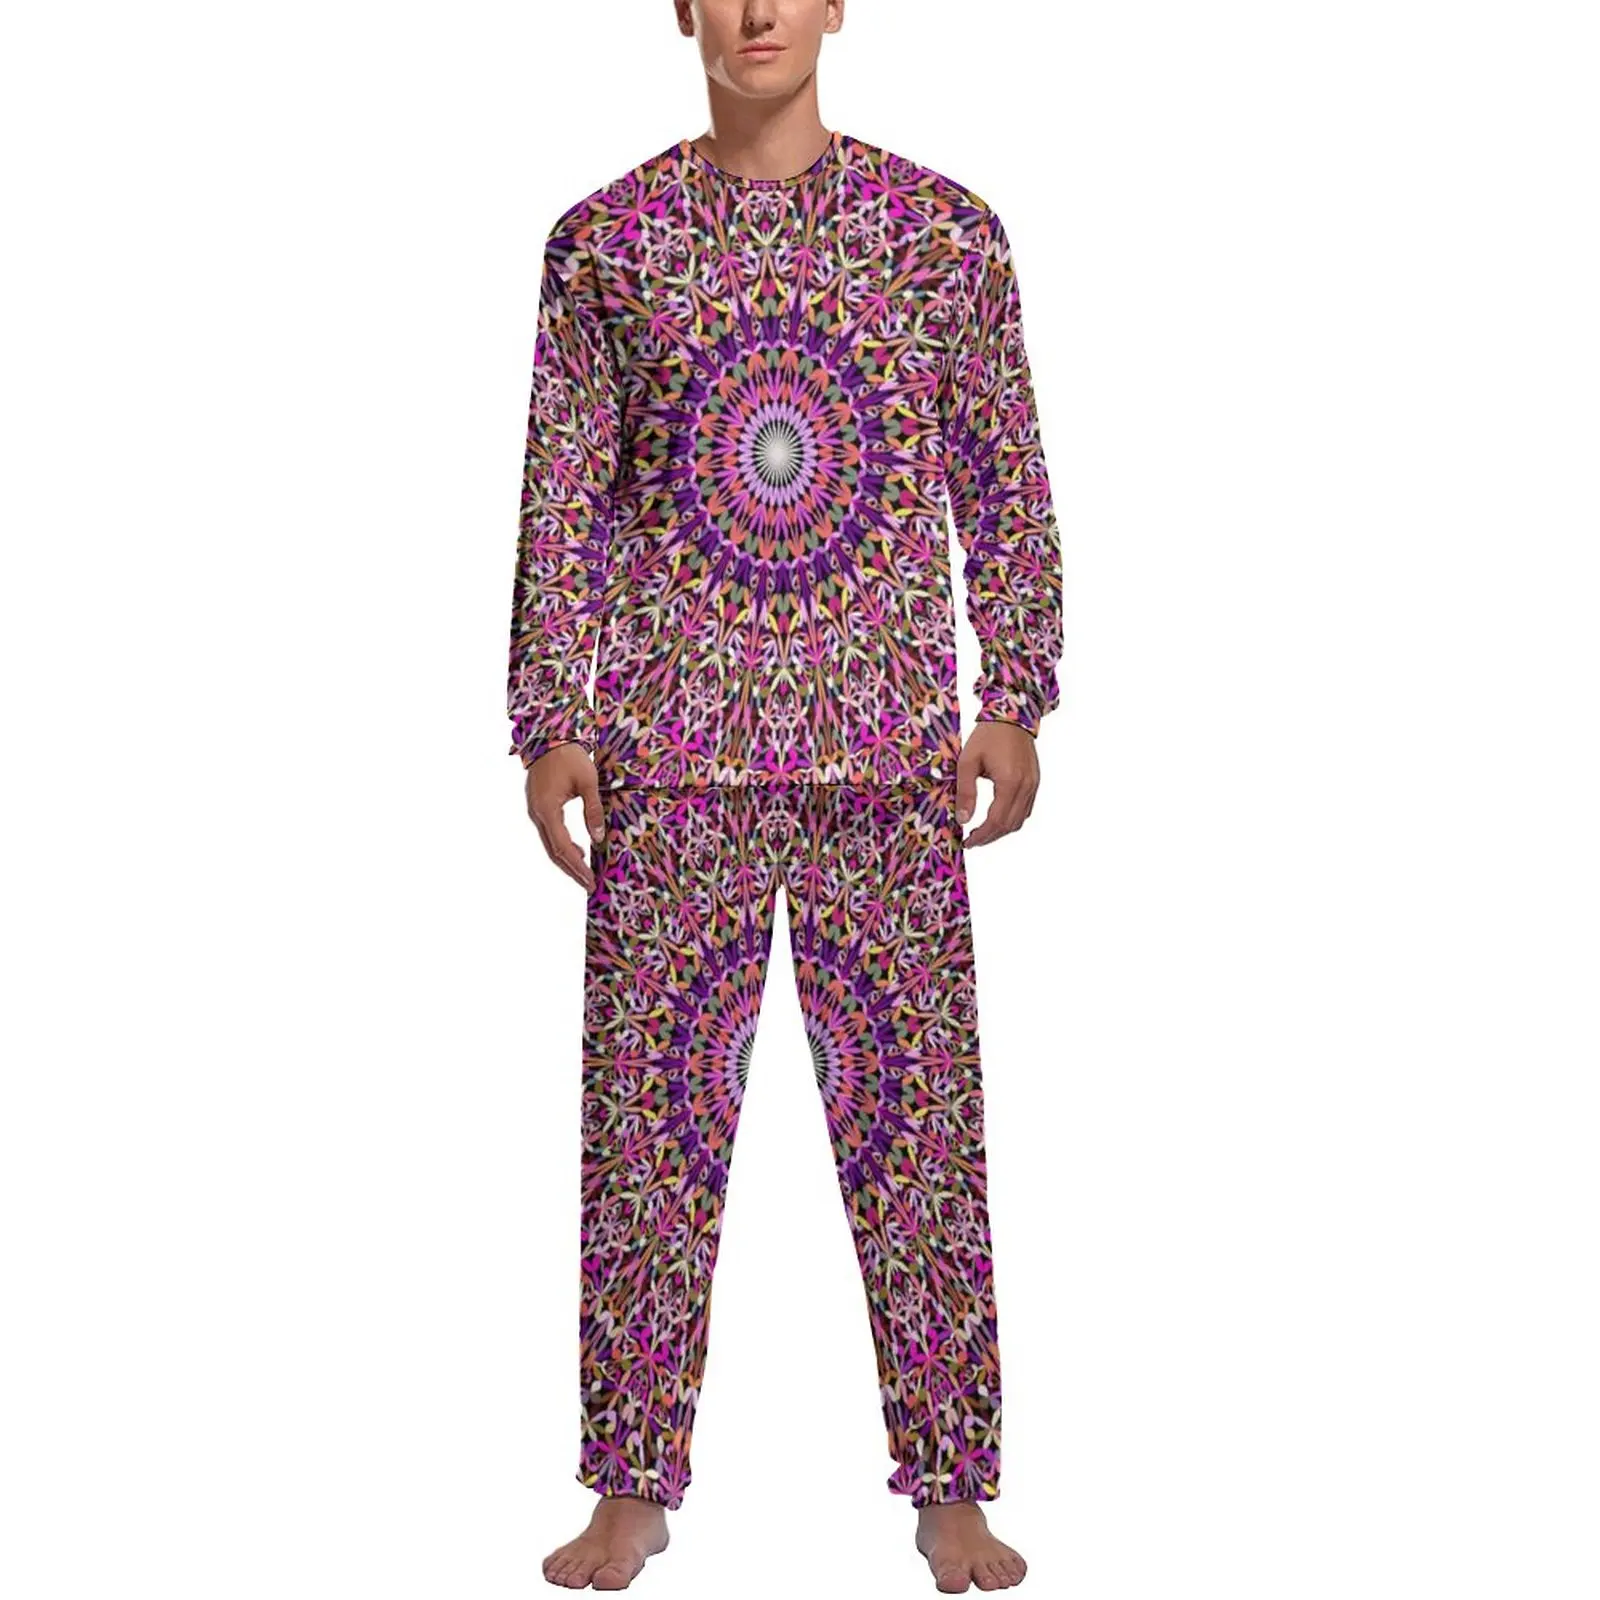 Colorful Mandala Pajamas Autumn Abstract Floral Print Home Nightwear Male 2 Pieces Graphic Long-Sleeve Cute Pajamas Set